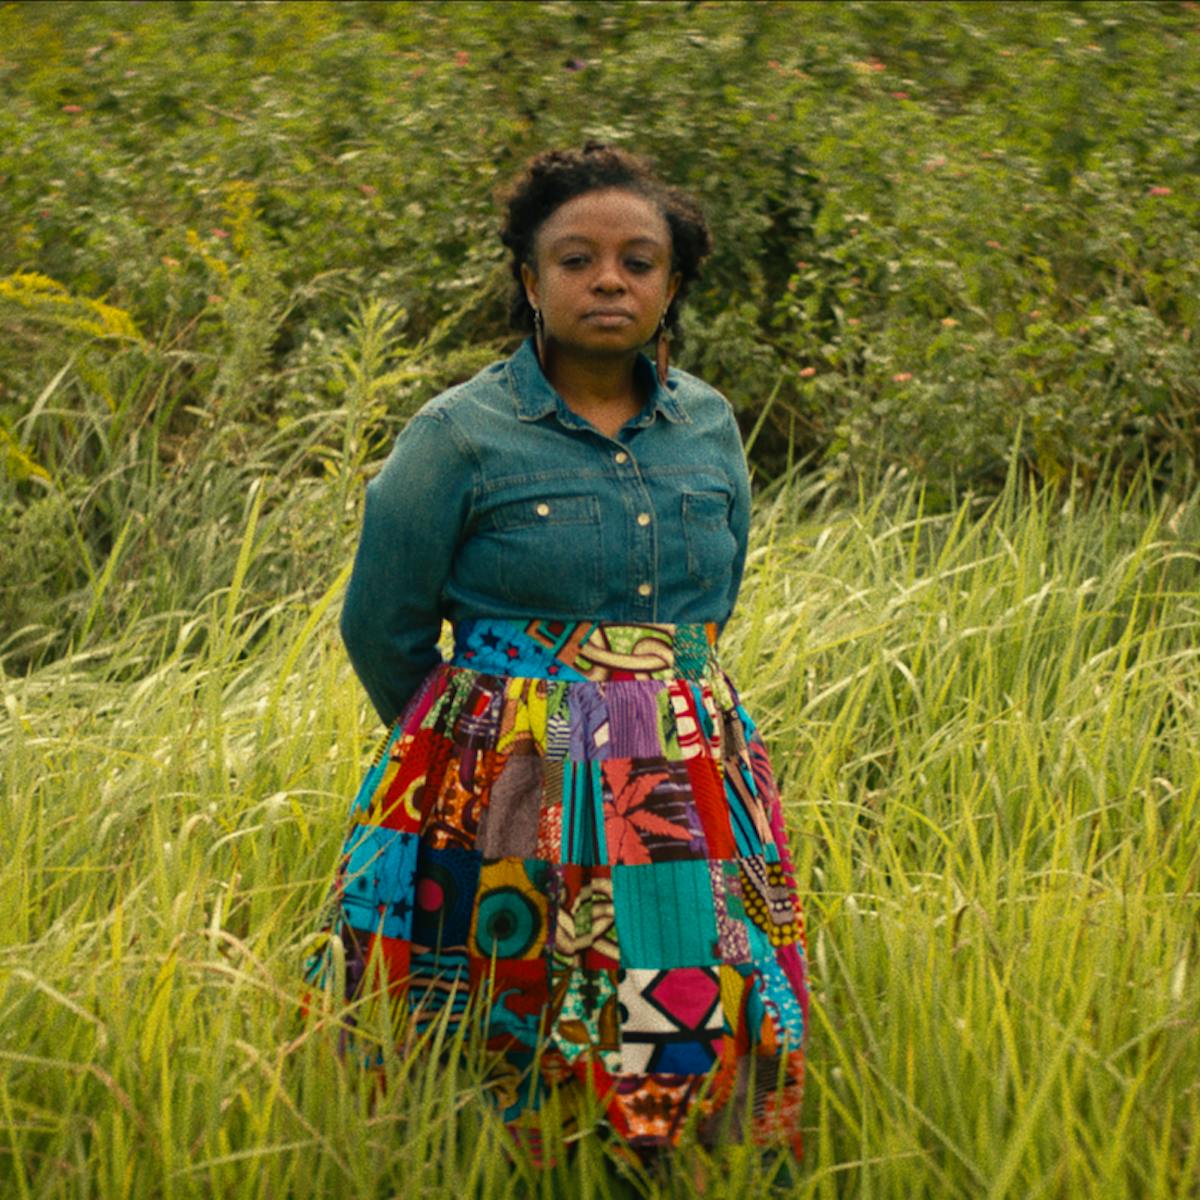 Joycelyn Davis wears a denim long-sleeved shirt and patterned skirt and stands in a field of tall grass.